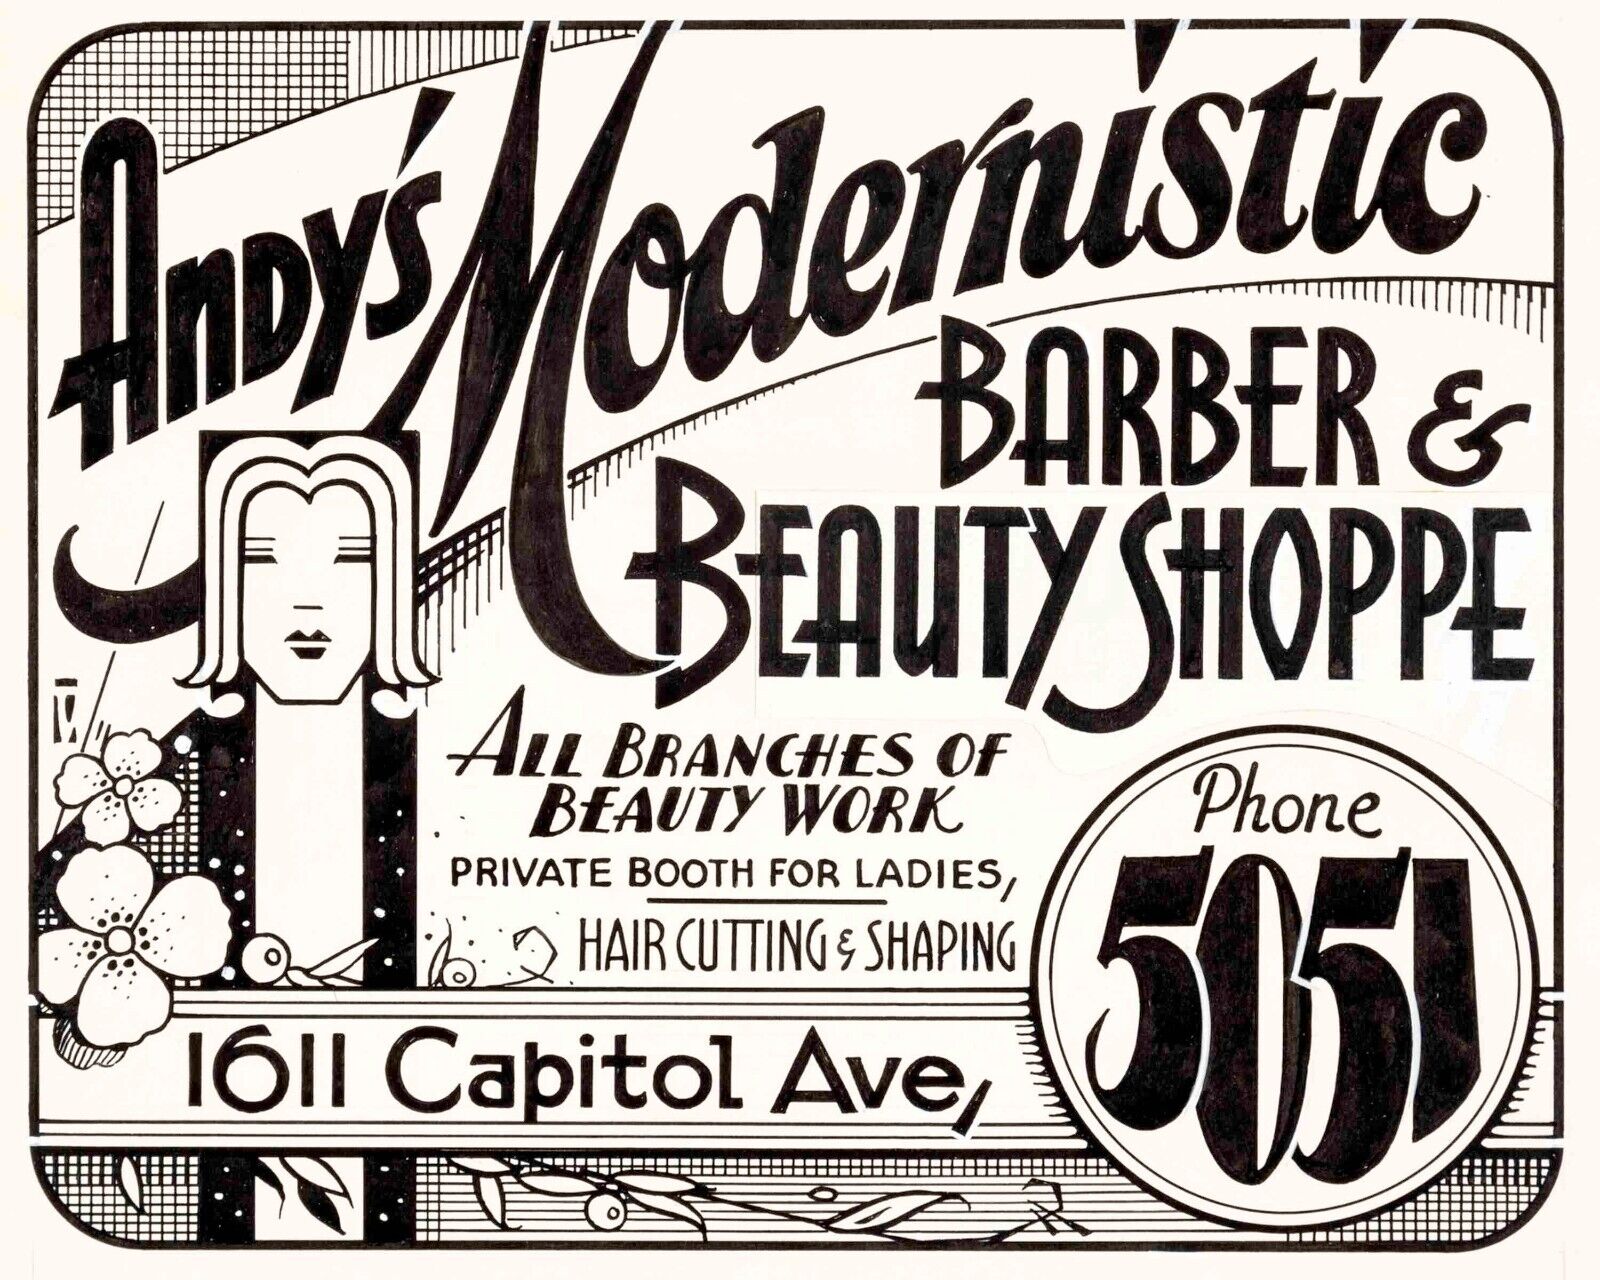 Andys Barber Beauty Shoppe Advertising 1930s Mousepad Computer Mouse Pad  7 x 9